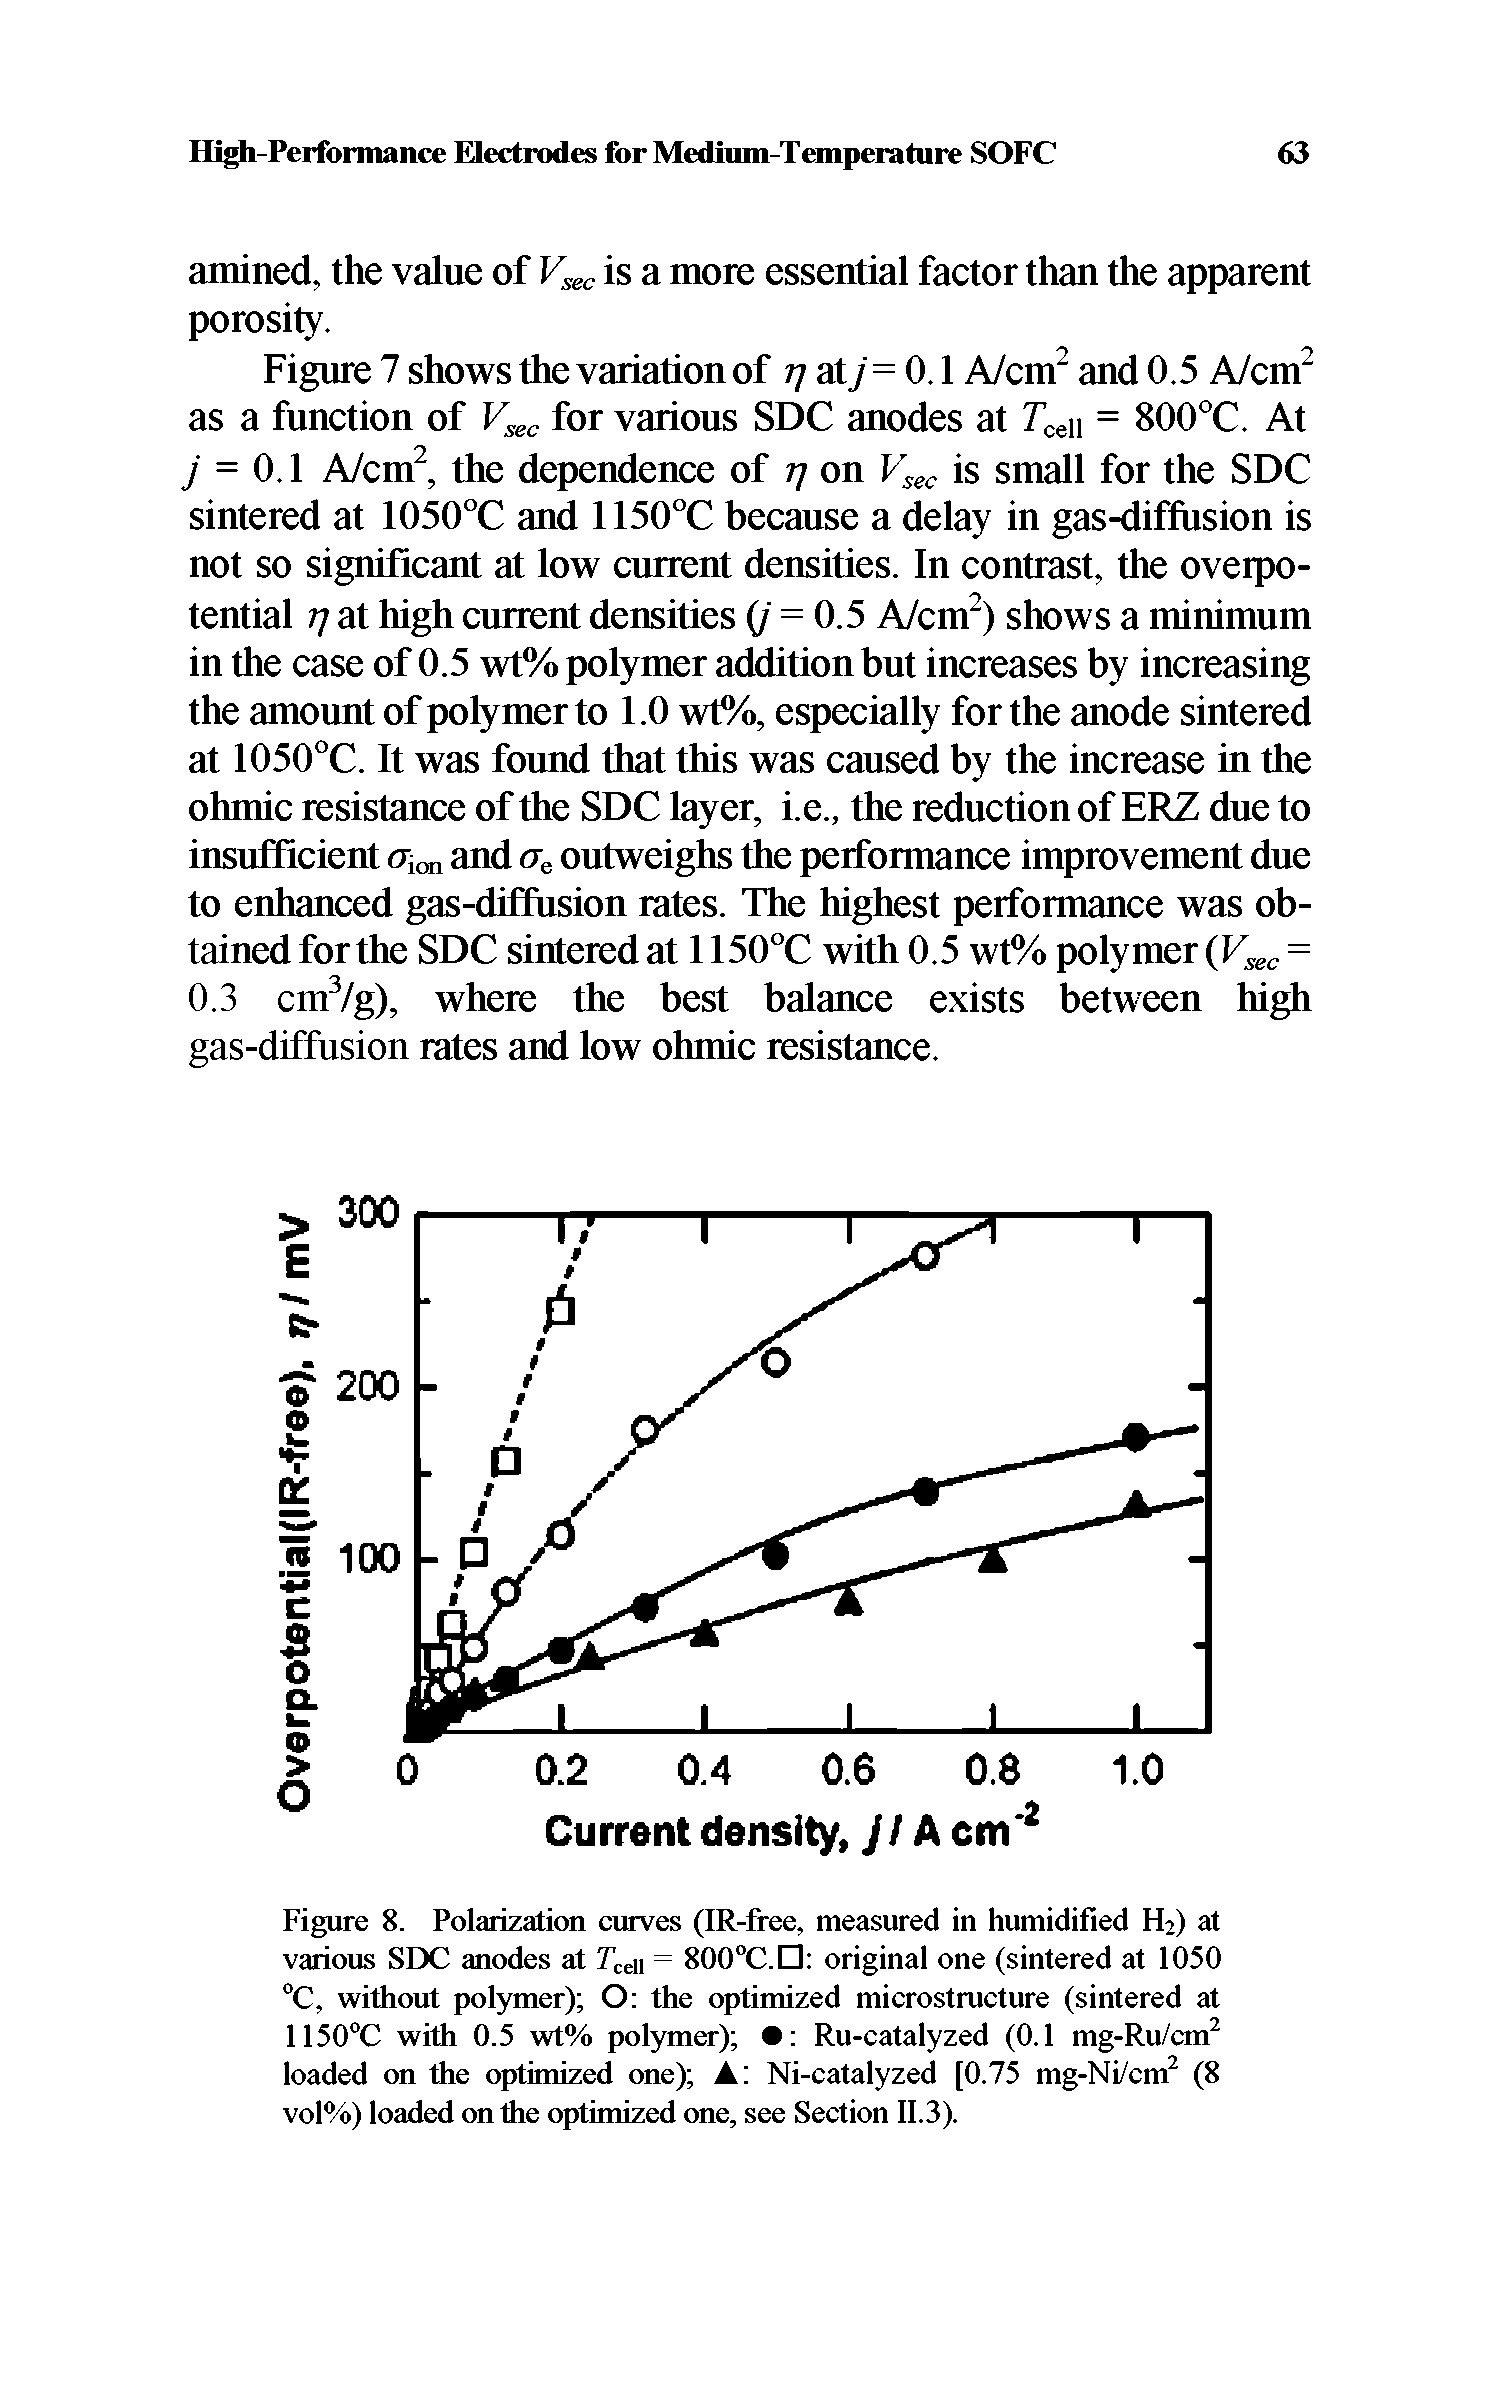 Figure 8. Polarization curves (IR-free. measured in humidified Hj) at various SDC anodes at Tca = 800 C.O original one (sintered at 1050 °C, without polymer) O the optimized microstructure (sintered at 1150°C with 0.5 wt% polymer) Ru-catalyzed (0.1 mg-Ru ern loaded on the optimized one) Ni-catalyzed [0.75 mg-Nicnf (8 vol%) loaded on the optimized one, see Section 11.3).